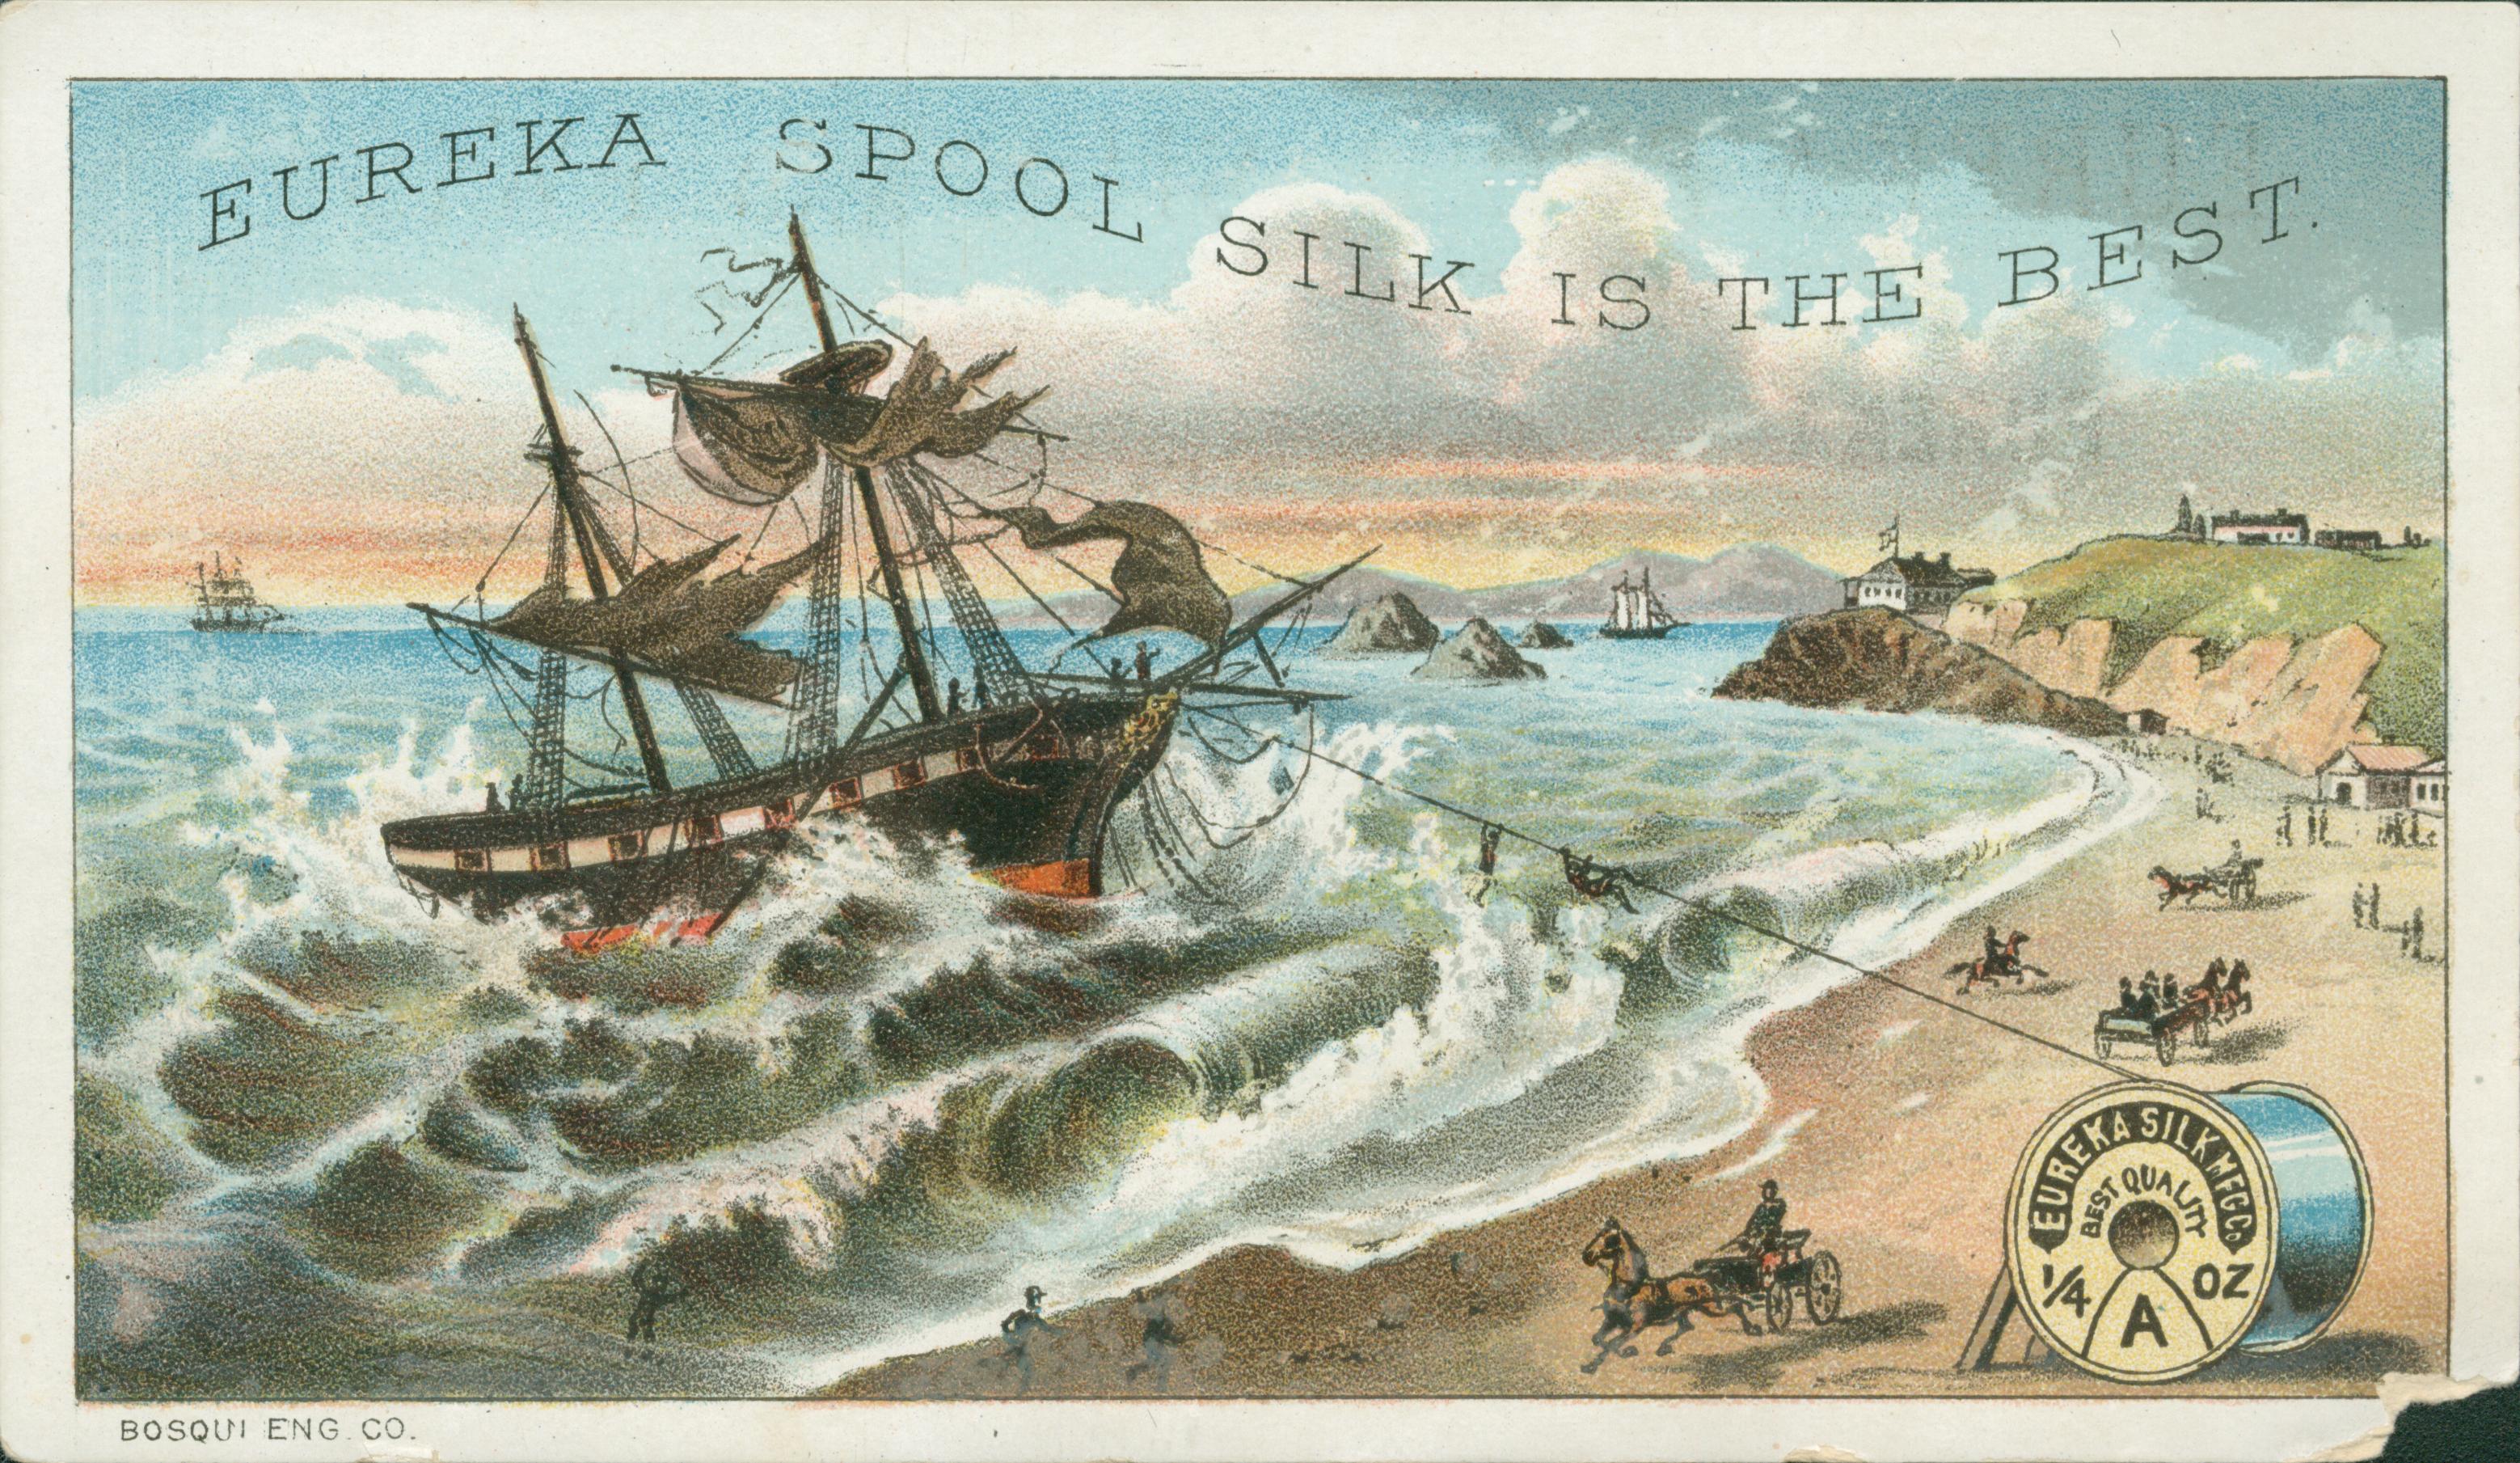 This trade card shows a ship tossed on a stormy see being anchored to the shore by a spool of Eureka Silk thread.